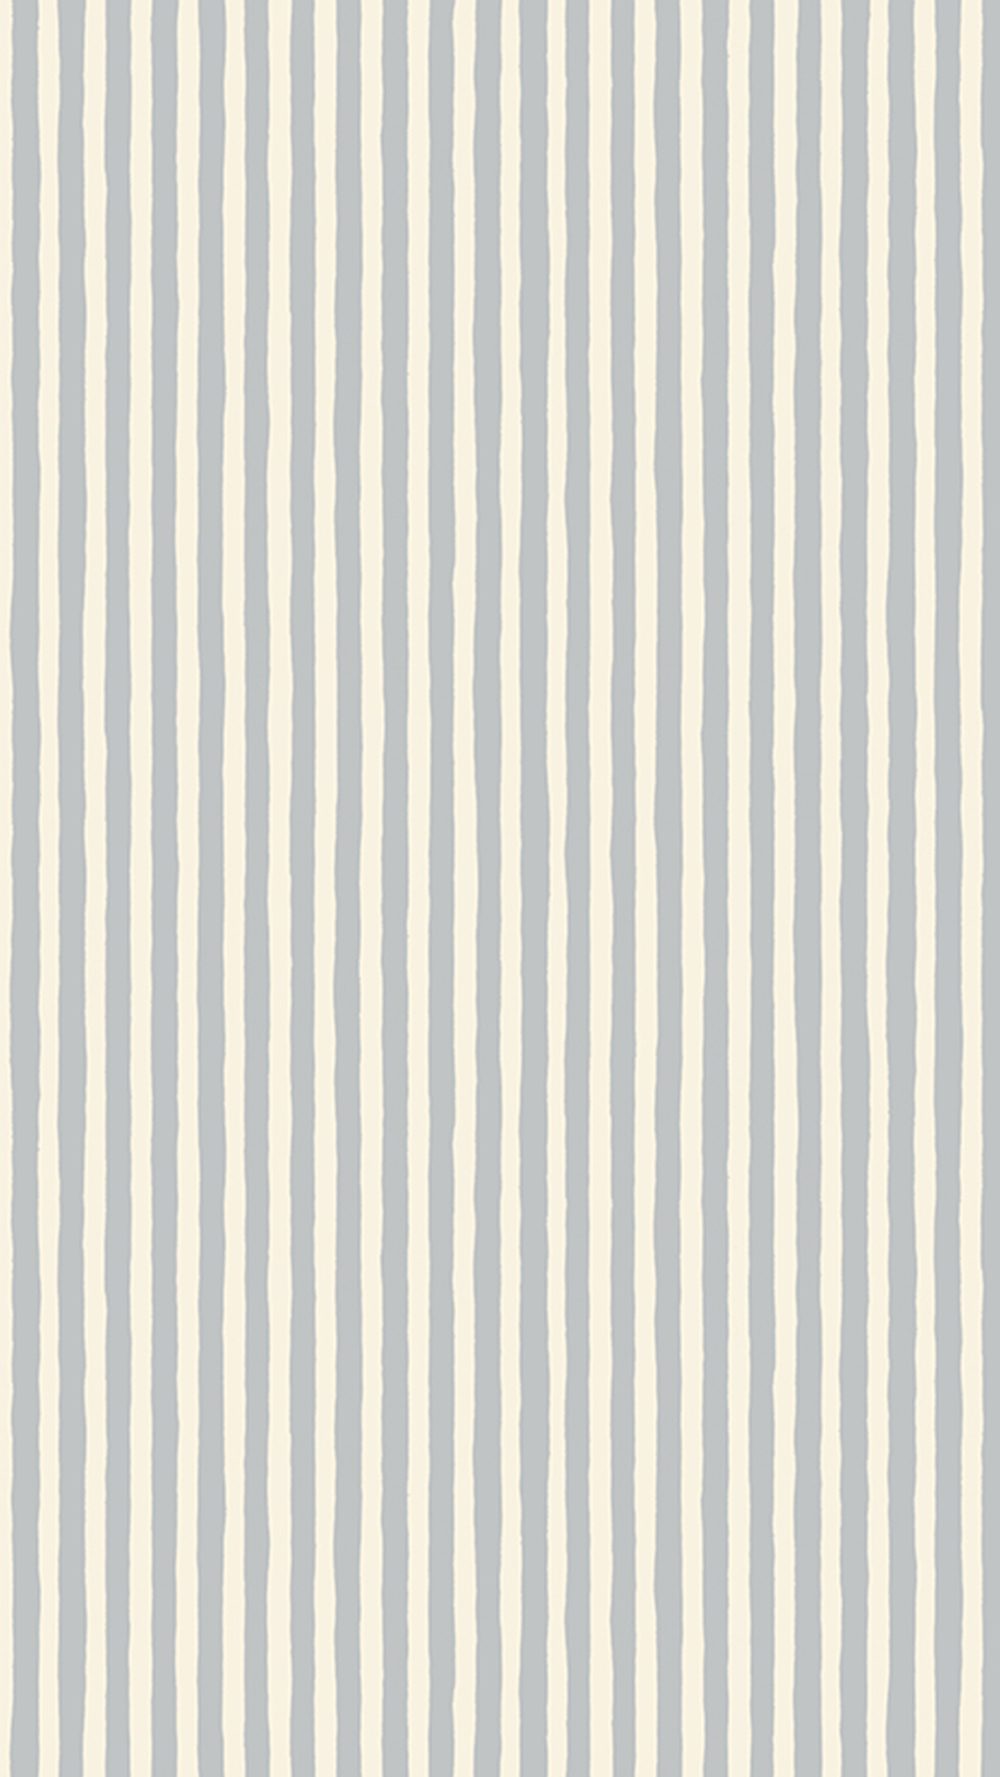 Hand Painted Stripe - Barton Blue - Costwold White